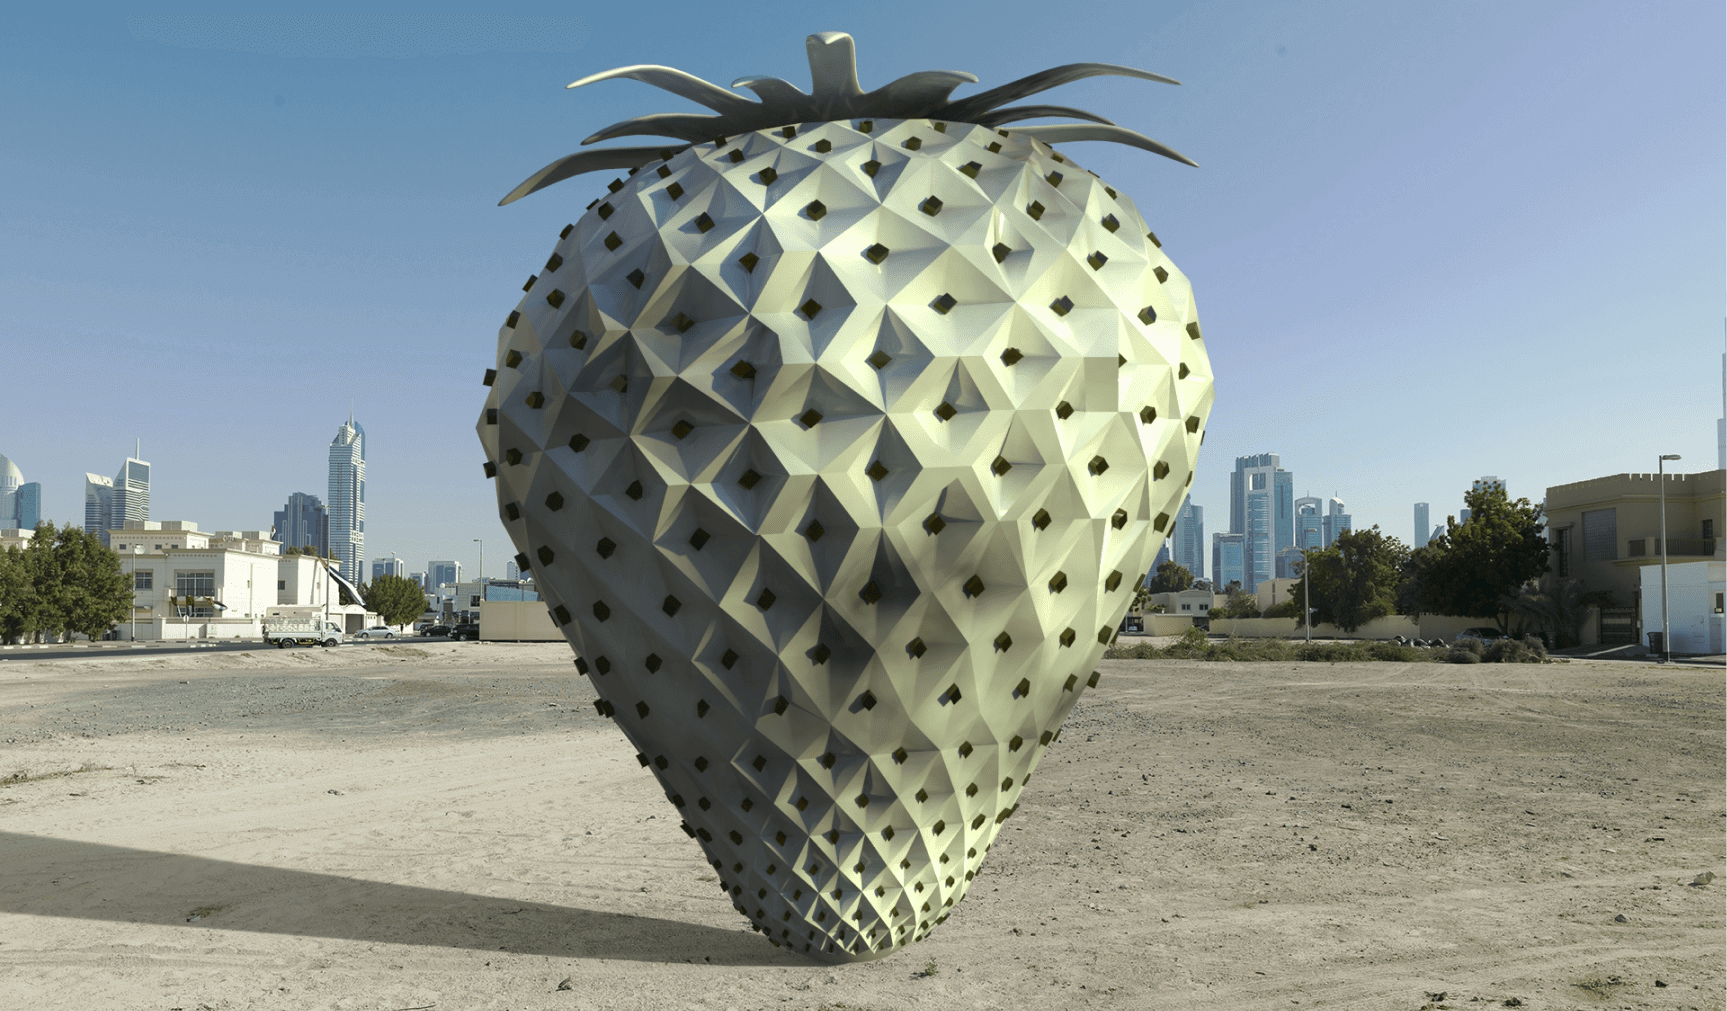 3D concrete strawberry inspired by concretism movement